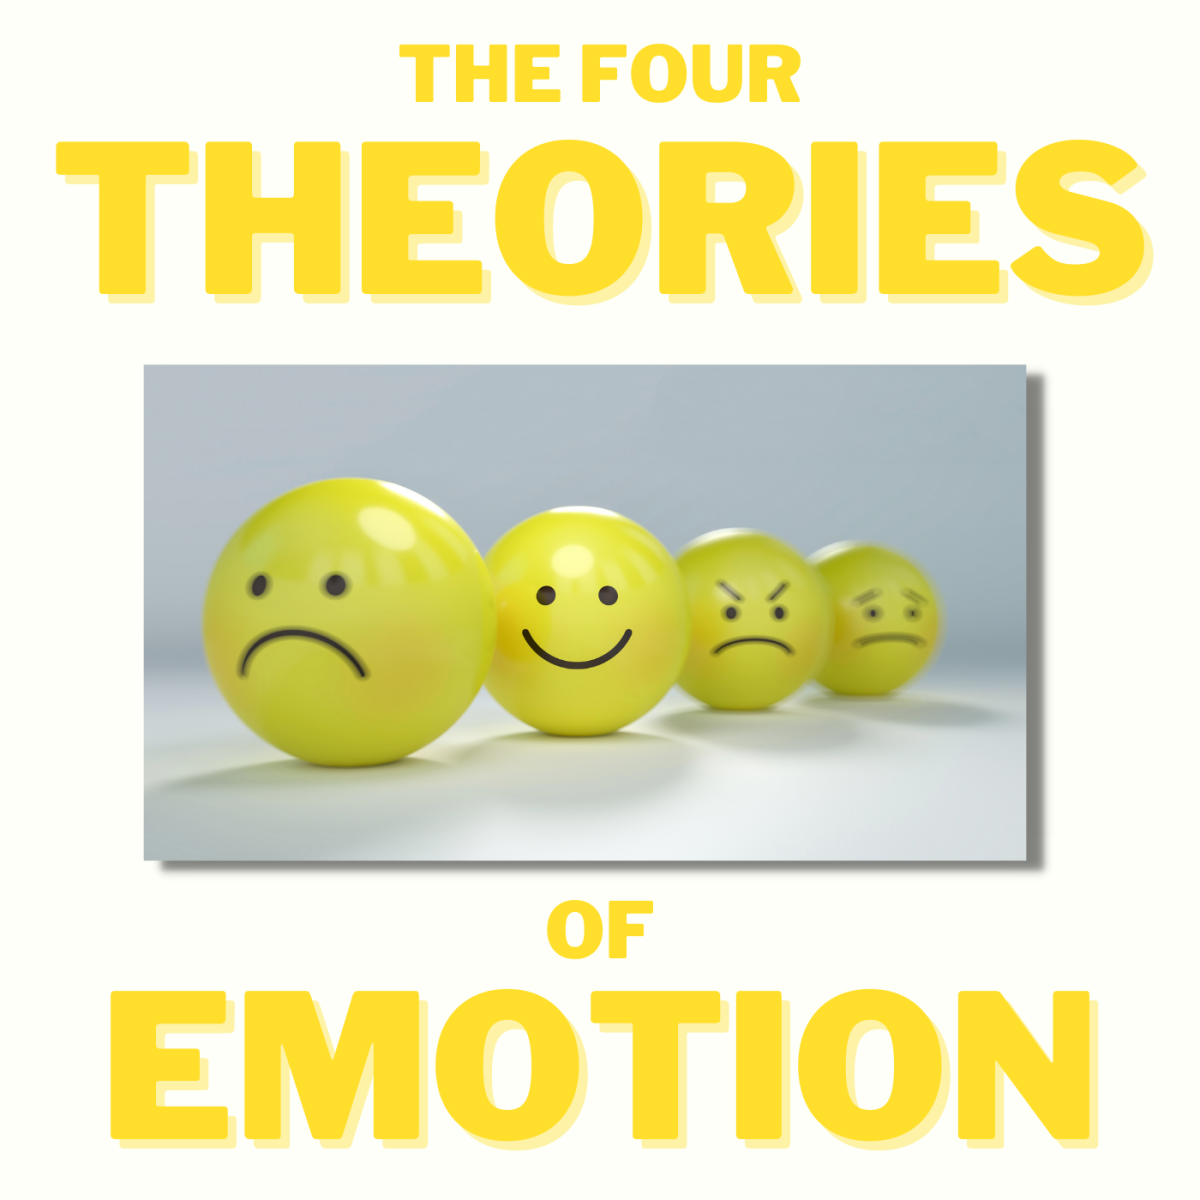 The four theories of emotion